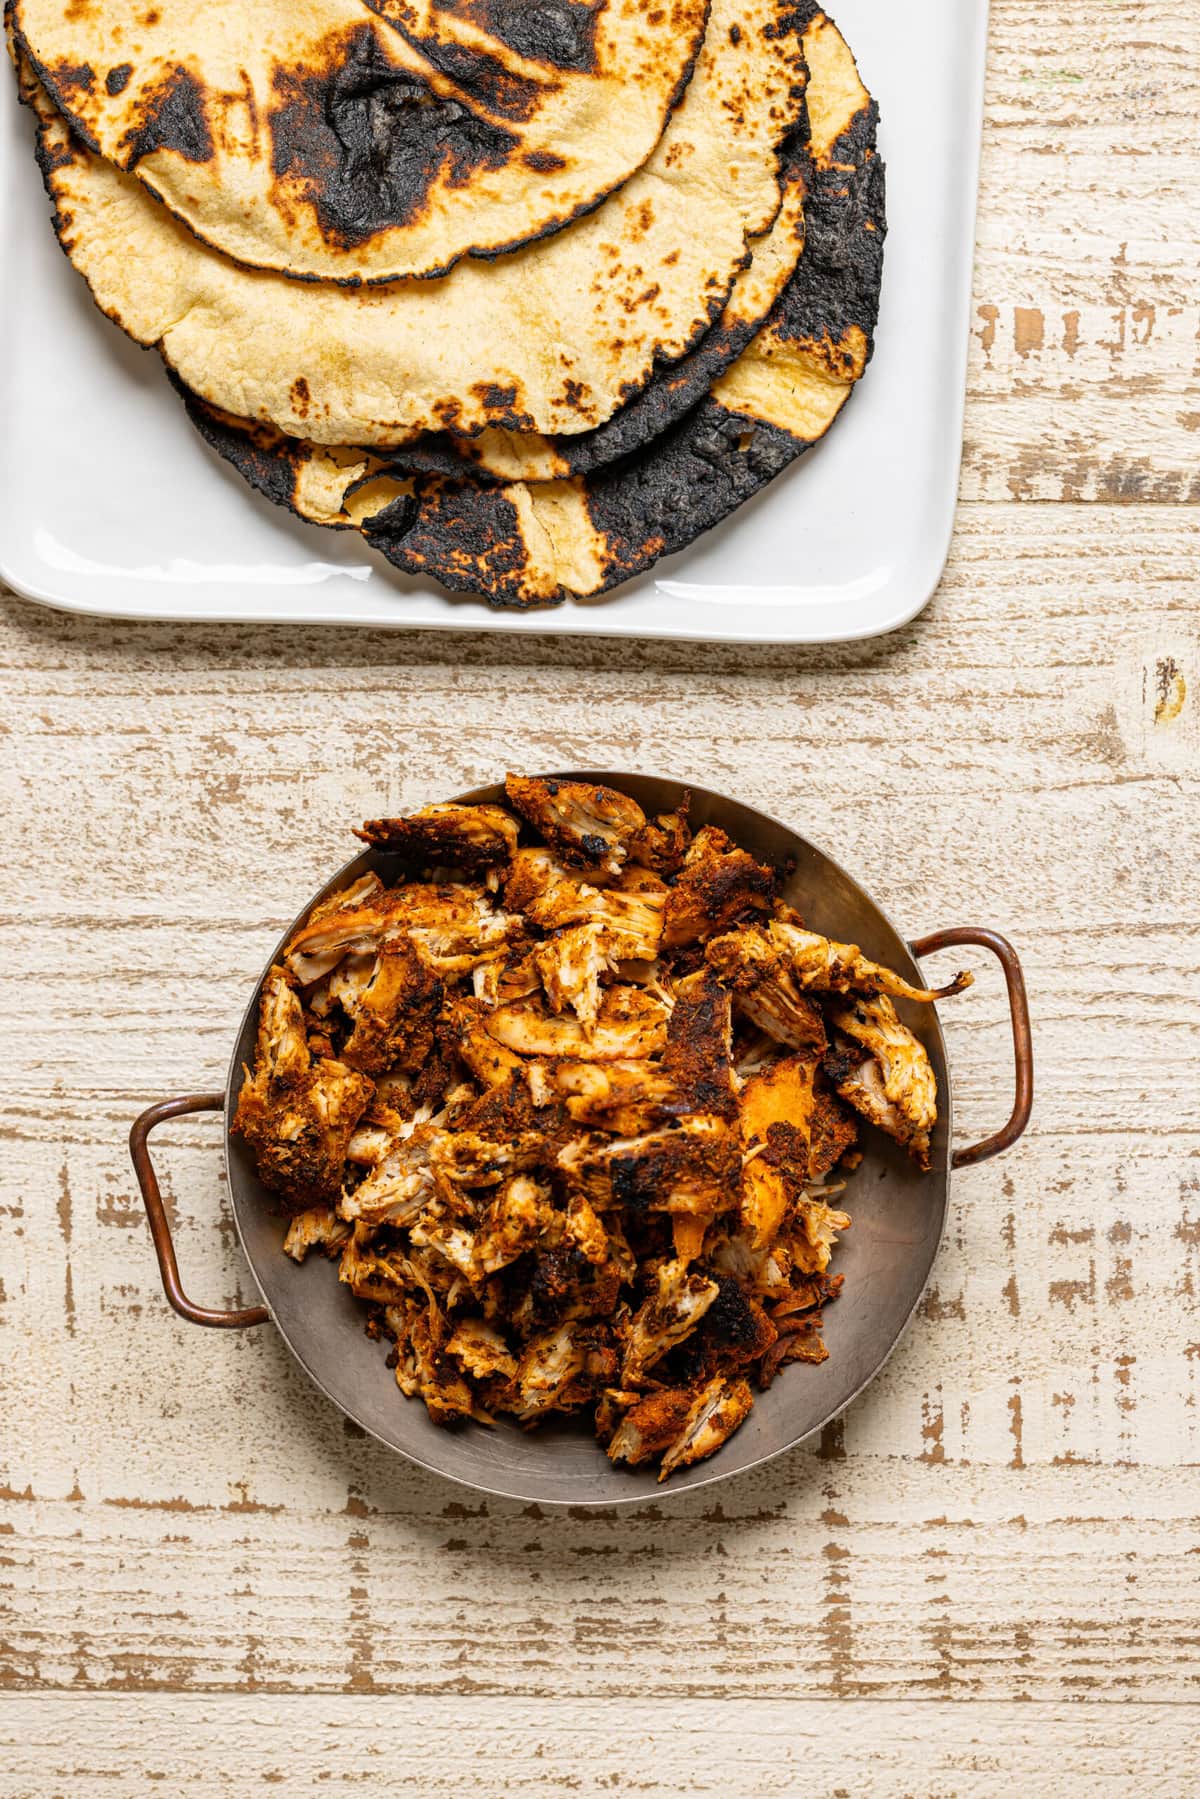 Shredded blackened chicken in a bowl and charred tortillas.